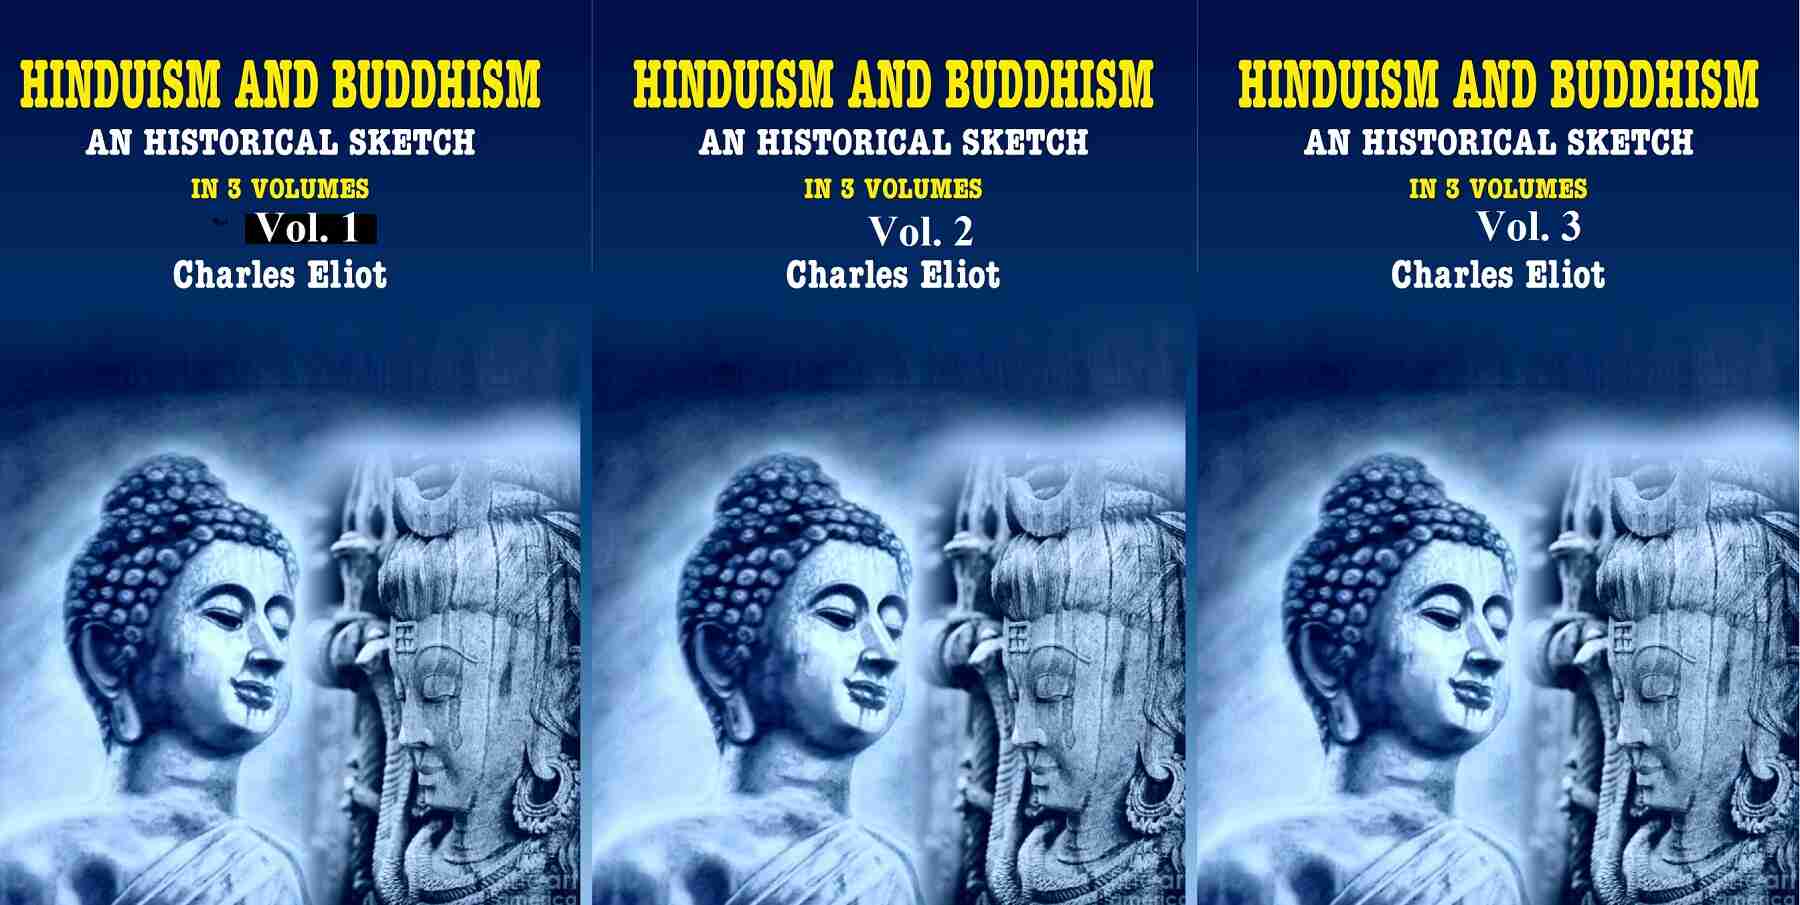 Hinduism and Buddhism An Historical Sketch In 3 Vol.s (Set) In 3 Vol.s (Set) In 3 Vol.s (Set) In 3 Vol.s (Set) In 3 Vol.s (Set) In 3 Vol.s (Set) In 3 Vol.s (Set) In 3 Vol.s (Set) In 3 Vol.s (Set) In 3 Vol.s (Set) In 3 Vol.s (Set) In 3 Vol.s (Set) In 3 Vol.s (Set) In 3 Vol.s (Set) In 3 Vol.s (Set) In 3 Vol.s (Set) In 3 Vol.s (Set) In 3 Vol.s (Set) In 3 Vol.s (Set) In 3 Vol.s (Set) In 3 Vol.s (Set) In 3 Vol.s (Set) In 3 Vol.s (Set) In 3 Vol.s (Set) In 3 Vol.s (Set) In 3 Vol.s (Set) In 3 Vol.s (Set) In 3 Vol.s (Set) In 3 Vol.s (Set) In 3 Vol.s (Set) In 3 Vol.s (Set) In 3 Vol.s (Set) In 3 Vol.s (Set) In 3 Vol.s (Set) In 3 Vol.s (Set) In 3 Vol.s (Set) In 3 Vol.s (Set) In 3 Vol.s (Set) In 3 Vol.s (Set) In 3 Vol.s (Set) In 3 Vol.s (Set) In 3 Vol.s (Set) In 3 Vol.s (Set) In 3 Vol.s (Set) In 3 Vol.s (Set) In 3 Vol.s (Set) In 3 Vol.s (Set) In 3 Vol.s (Set) In 3 Vol.s (Set) In 3 Vol.s (Set) In 3 Vol.s (Set) In 3 Vol.s (Set) In 3 Vol.s (Set) In 3 Vol.s (Set) In 3 Vol.s (Set) In 3 Vol.s (Set) In 3 Vol.s (Set) In 3 Vol.s (Set) In 3 Vol.s (Set) In 3 Vol.s (Set) In 3 Vol.s (Set) In 3 Vol.s (Set) In 3 Vol.s (Set) In 3 Vol.s (Set) In 3 Vol.s (Set) In 3 Vol.s (Set) In 3 Vol.s (Set) In 3 Vol.s (Set) In 3 Vol.s (Set) In 3 Vol.s (Set) In 3 Vol.s (Set) In 3 Vol.s (Set) In 3 Vol.s (Set)